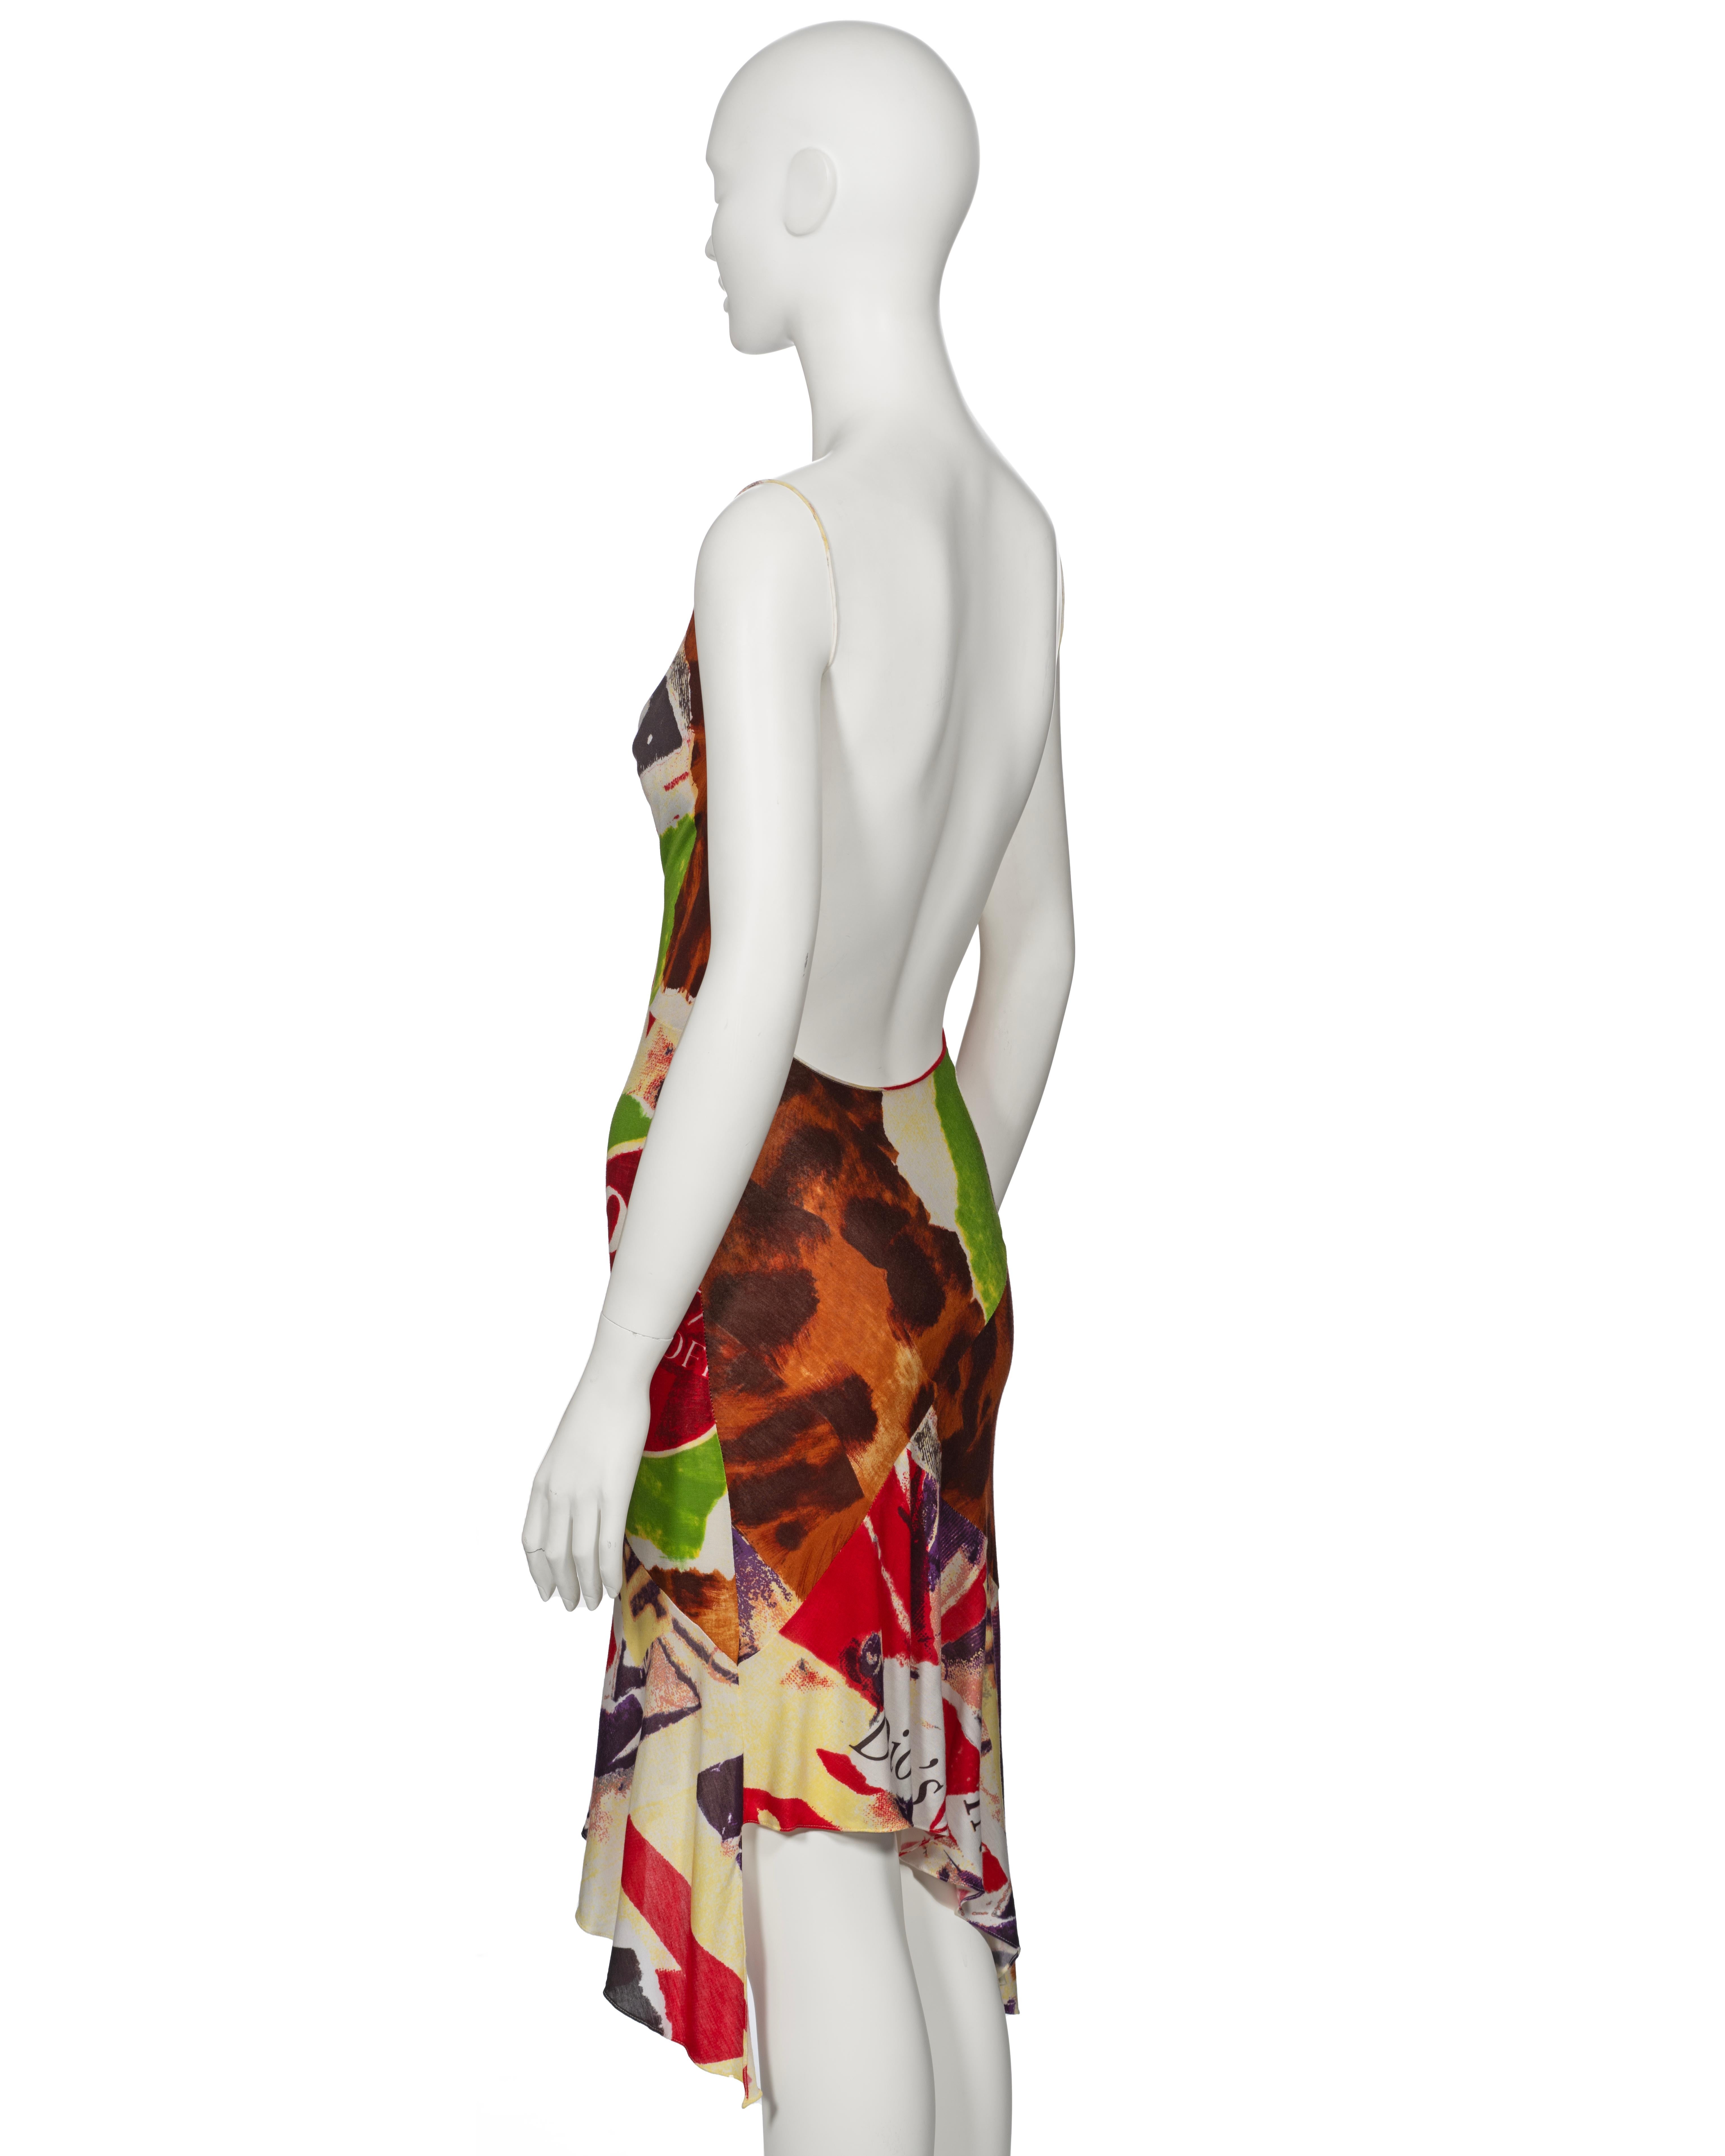 Christian Dior by John Galliano Montage Print Silk Jersey Dress, ss 2003 For Sale 4